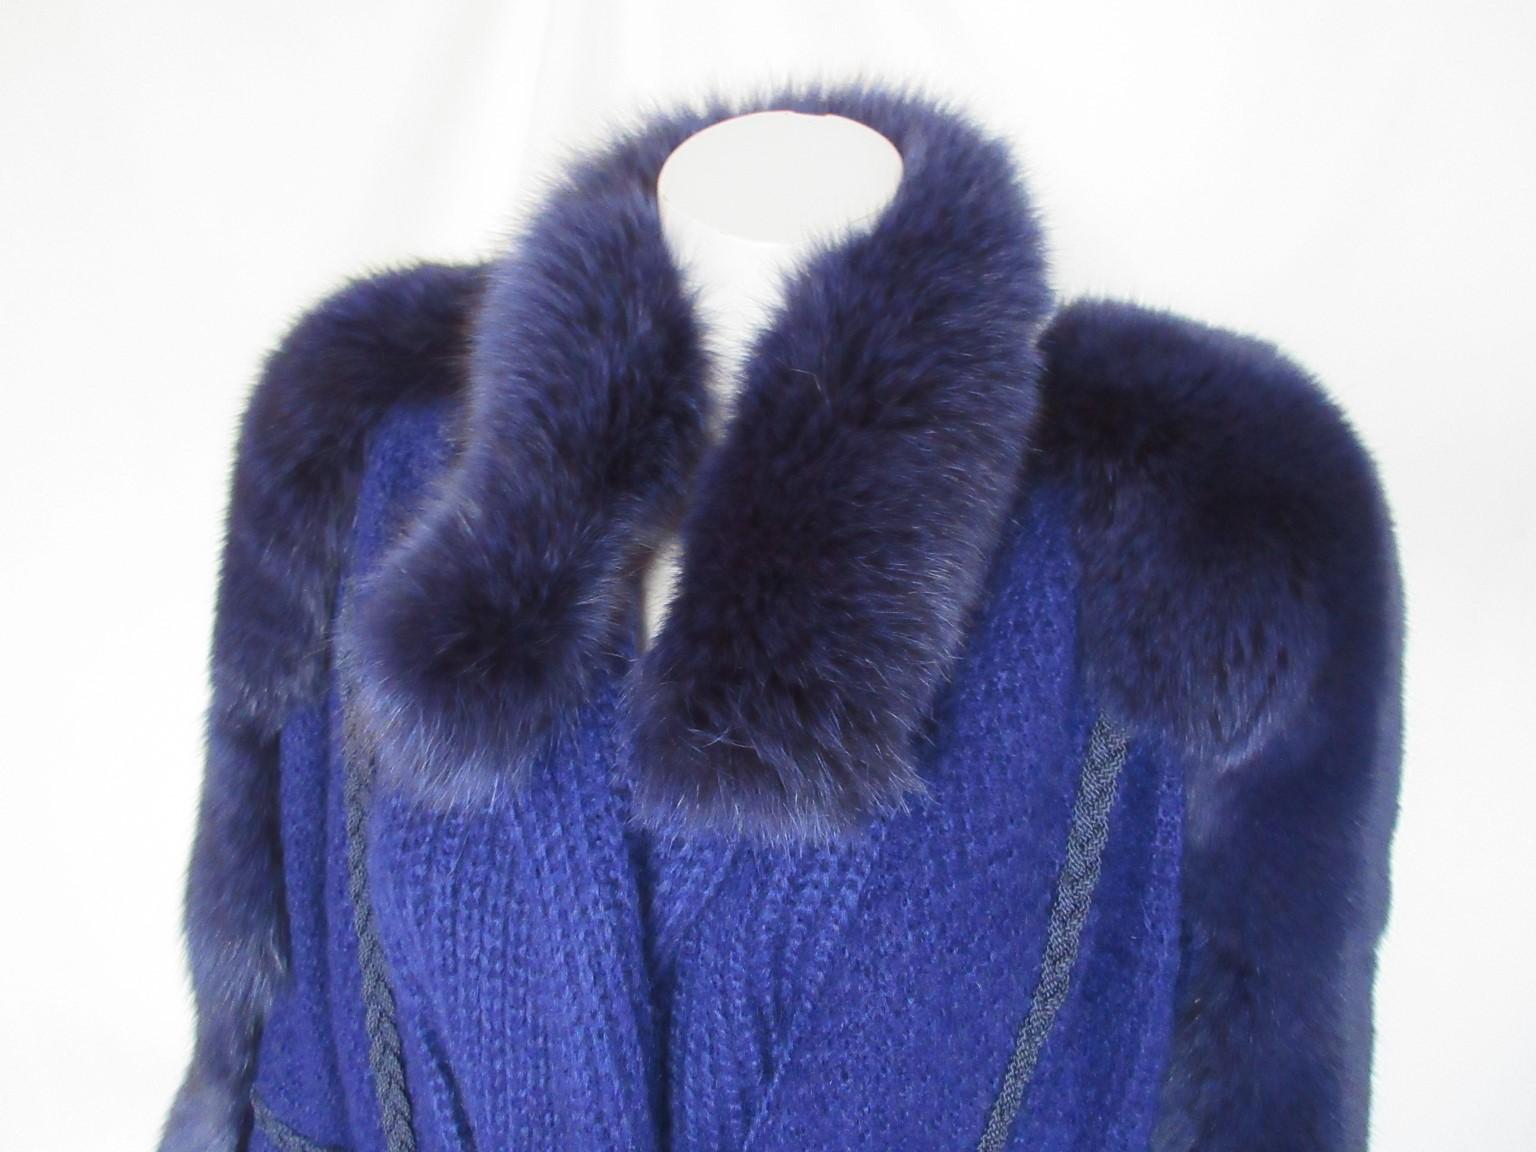 Fabulous original special blue wool coat vest trimmed with soft fox fur

We offer more exclusive fur items, view our frontstore

Details:
Blue knitted blend of lambswool/cashmere/ mohair with dyed blue fox fur
2 pockets and attached litlle closing